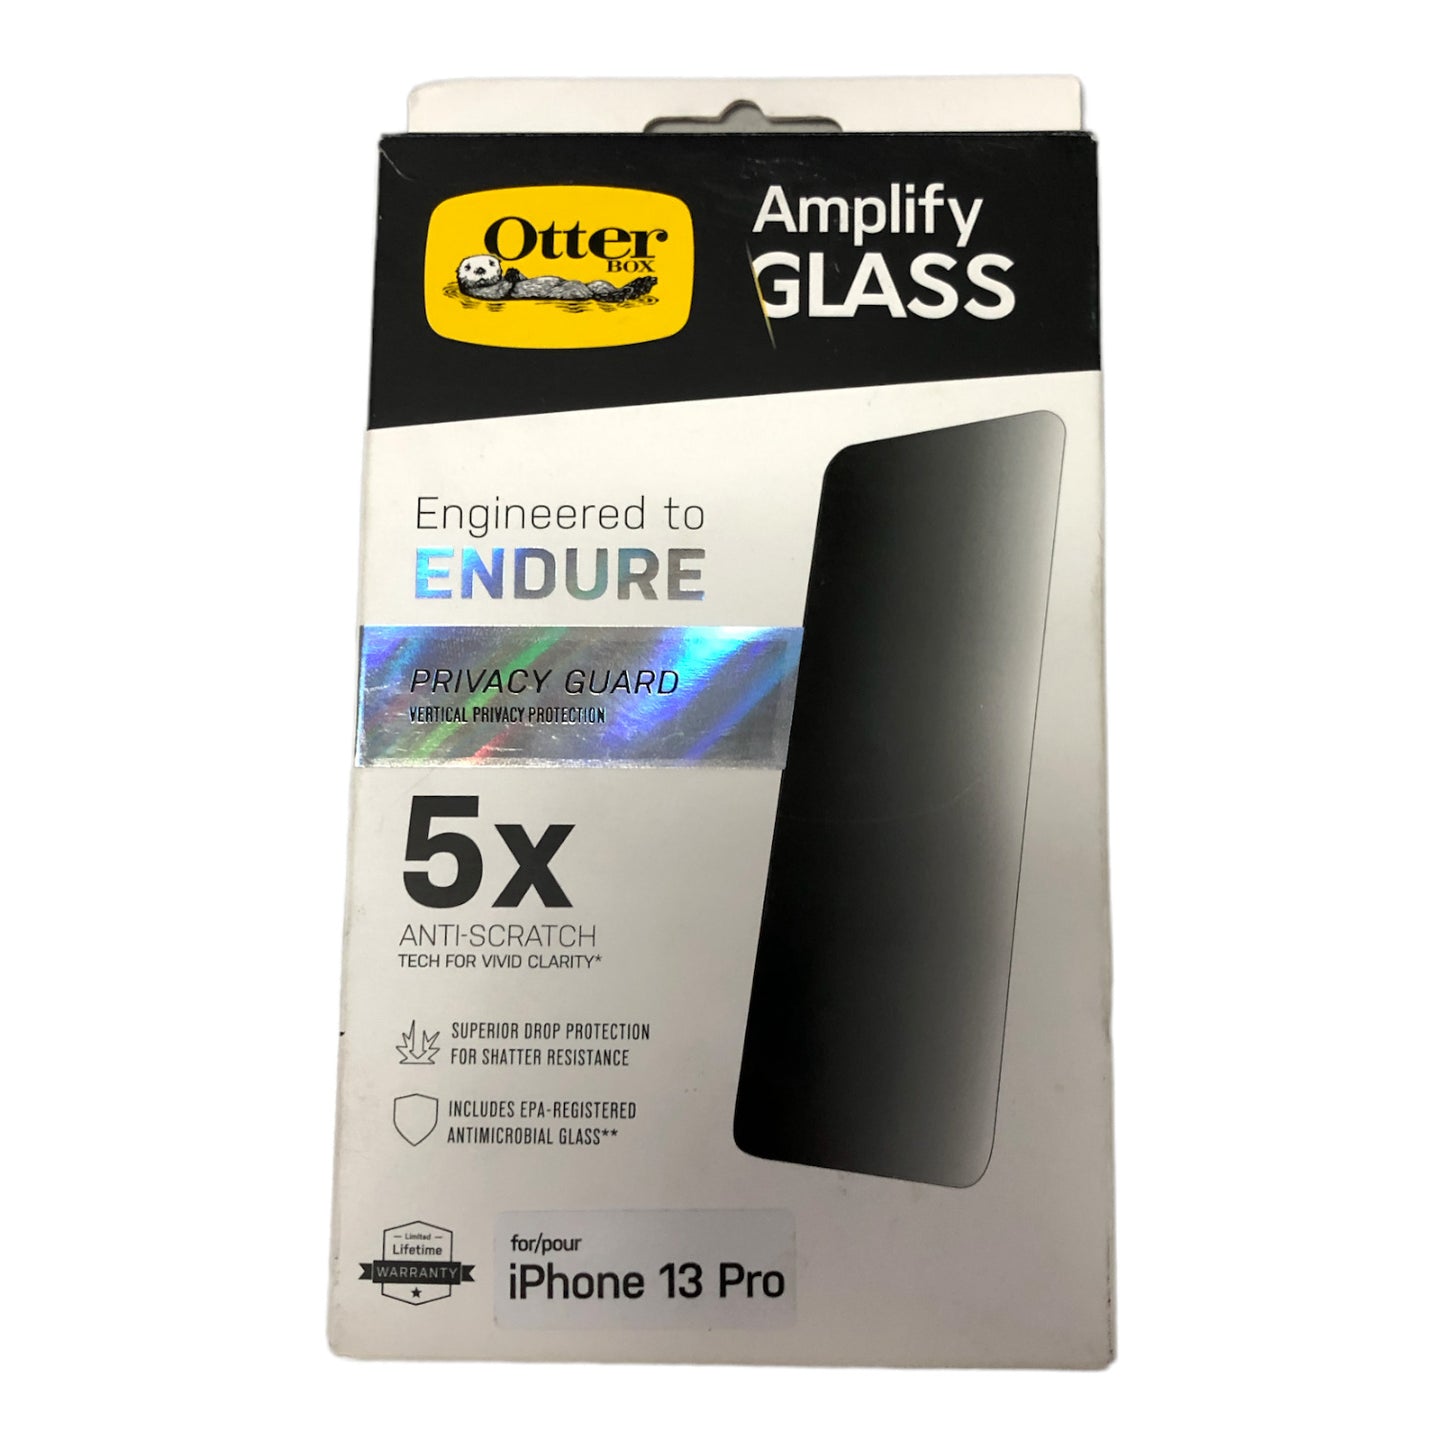 OtterBox Amplify Glass Privacy Guard Screen for Apple iPhone 13 and 13 Pro